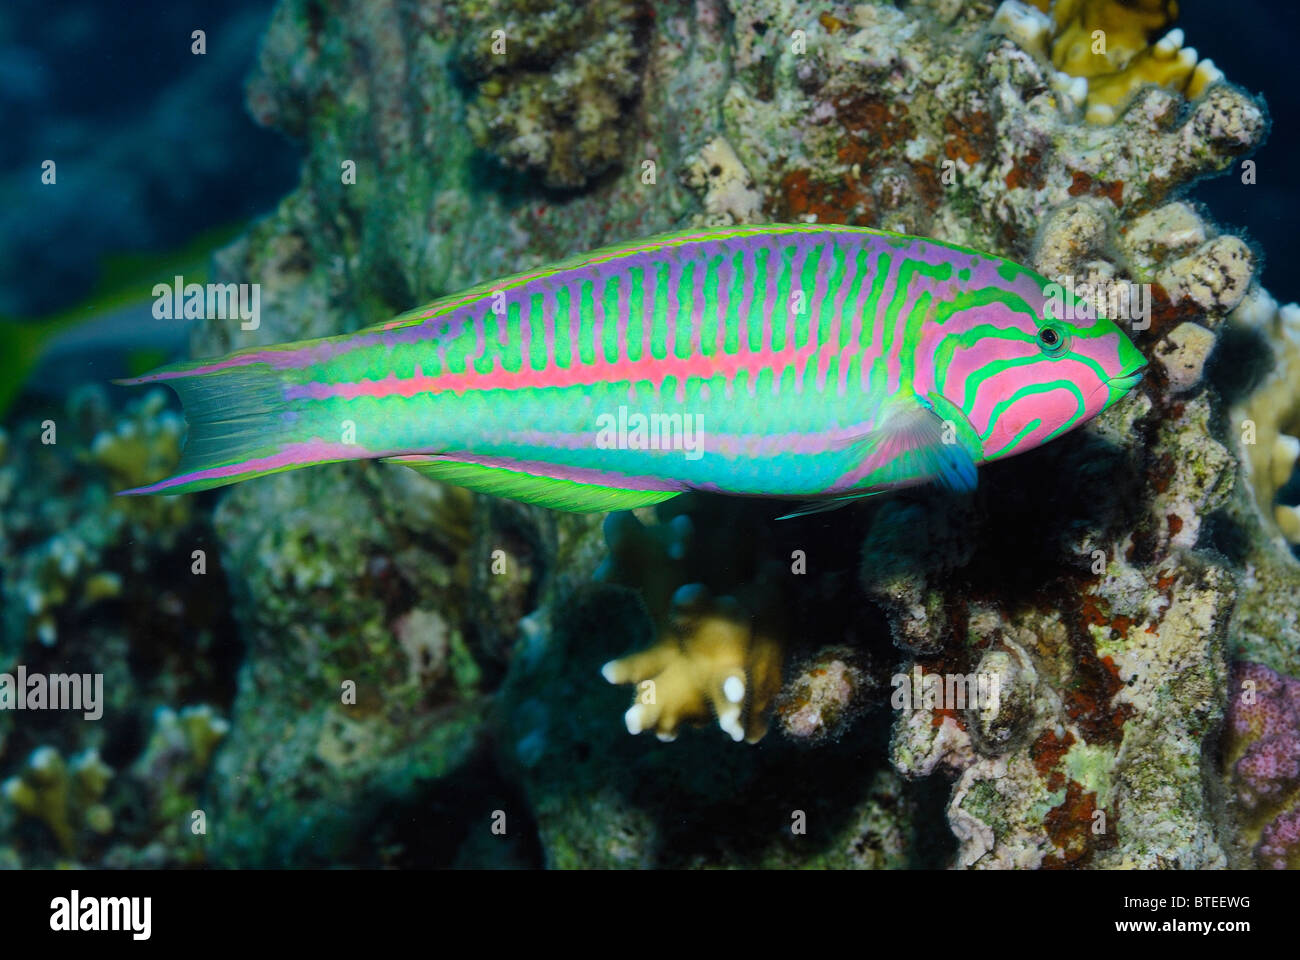 Surge wrasse fish over a reef in the Red Sea. Stock Photo